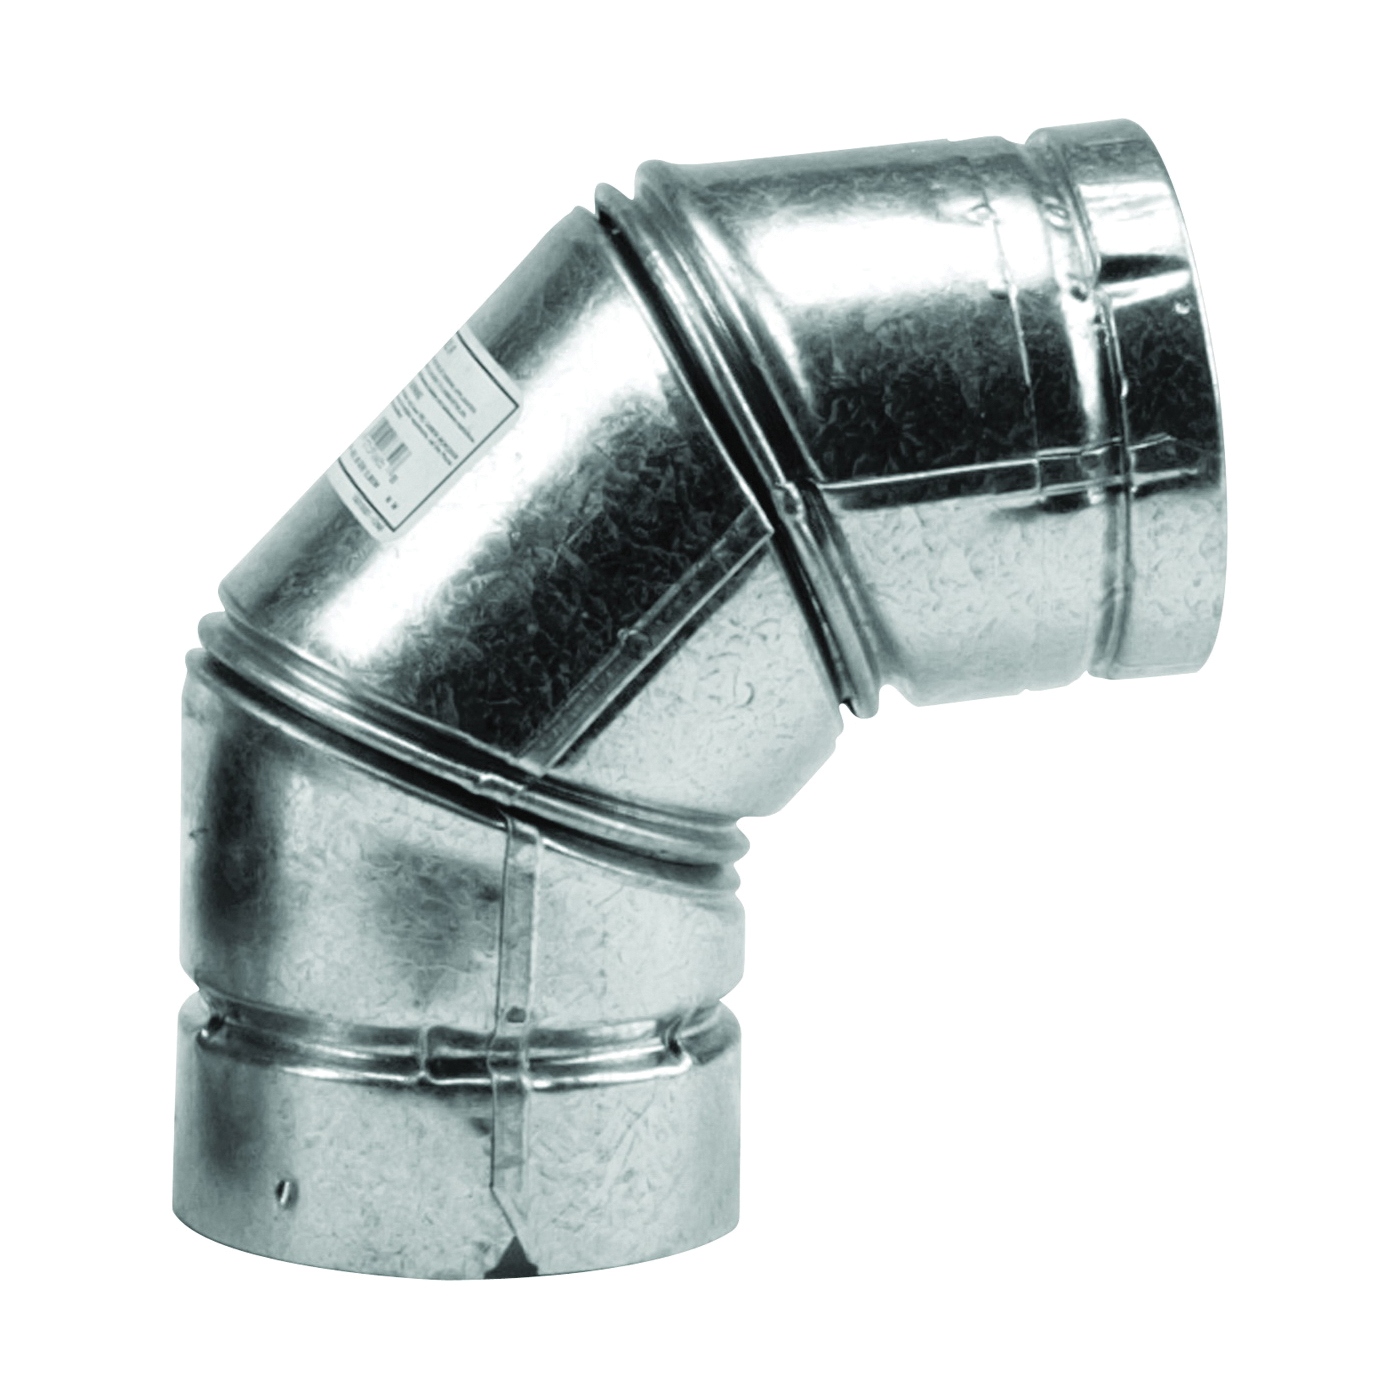 VP PELLET PIPE 243231/243230 Stove Pipe Elbow, 90 deg Angle, 3 in, Stainless Steel, Galvanized